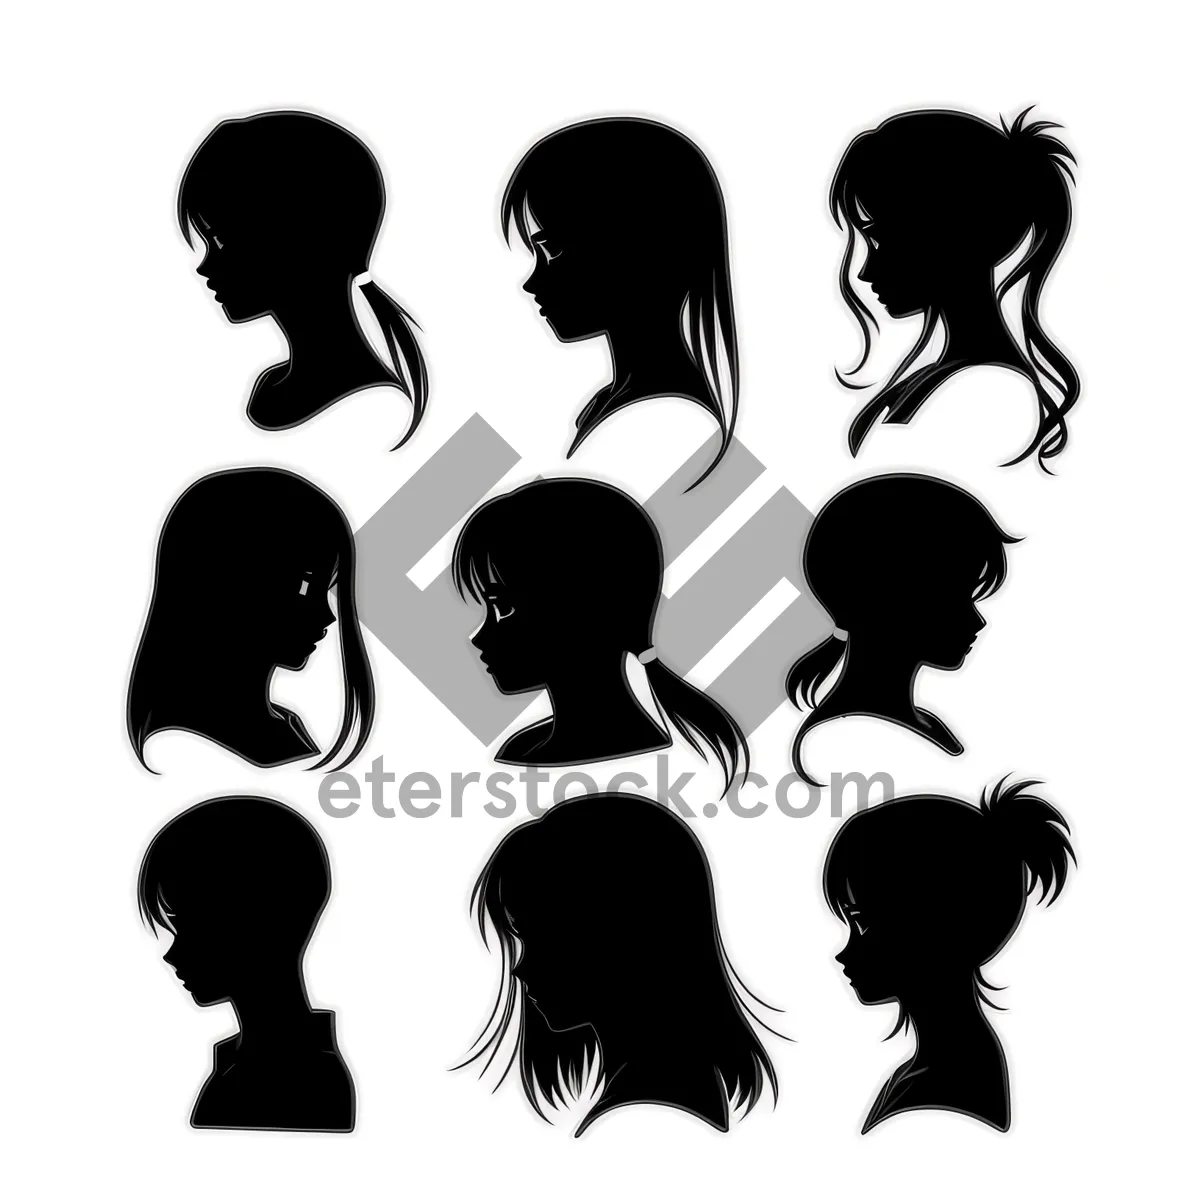 Picture of Black Man Cartoon Silhouette Collection - People Symbols